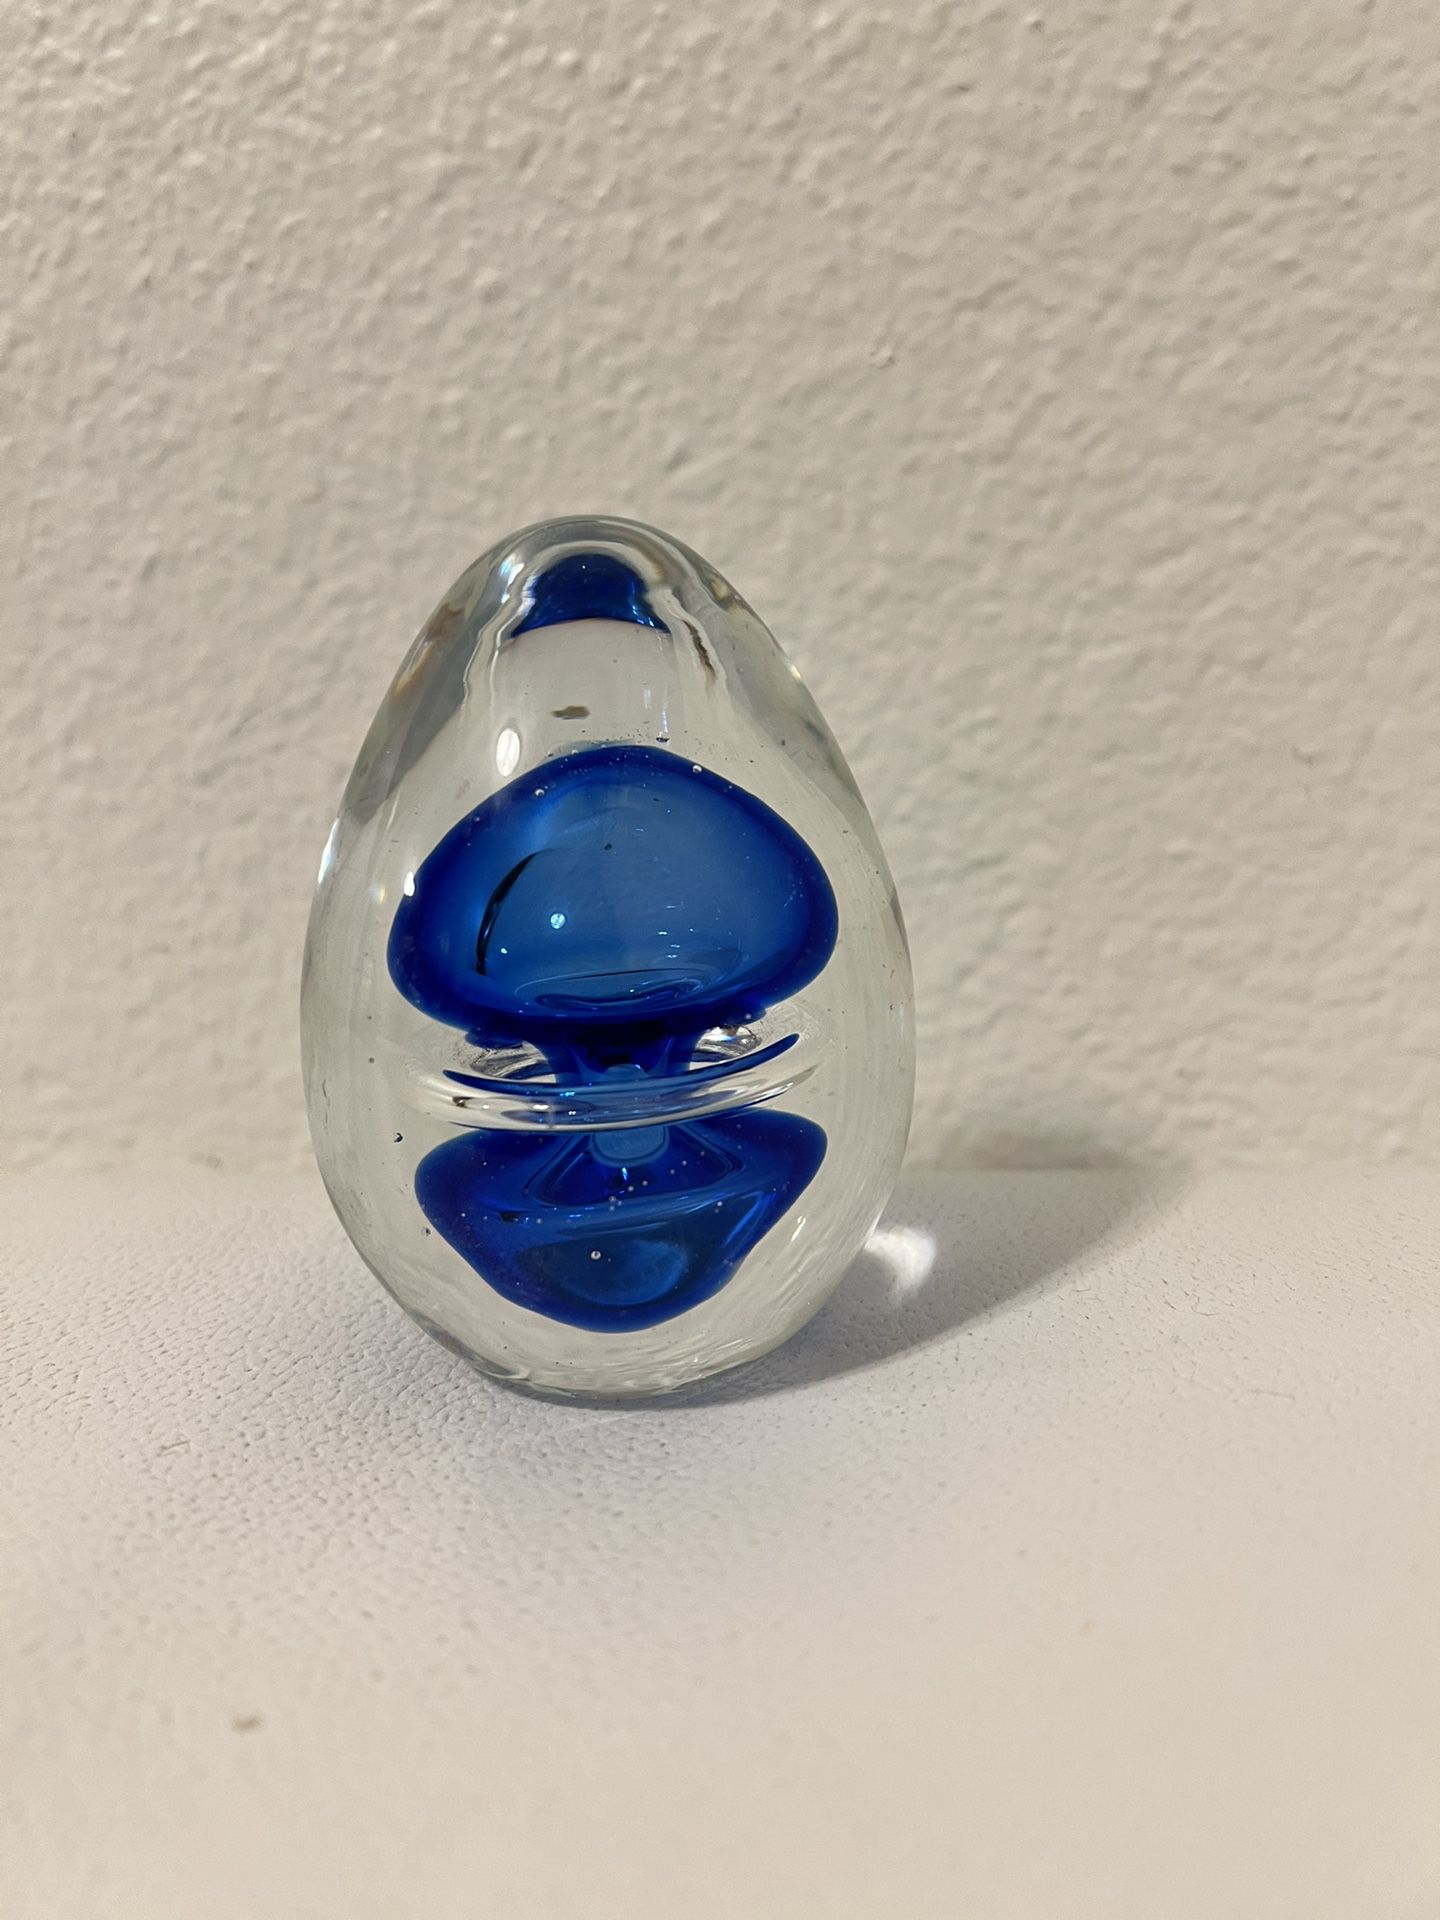 vintage art glass paperweight in the shape of an egg, clear blue bubbles, ocean